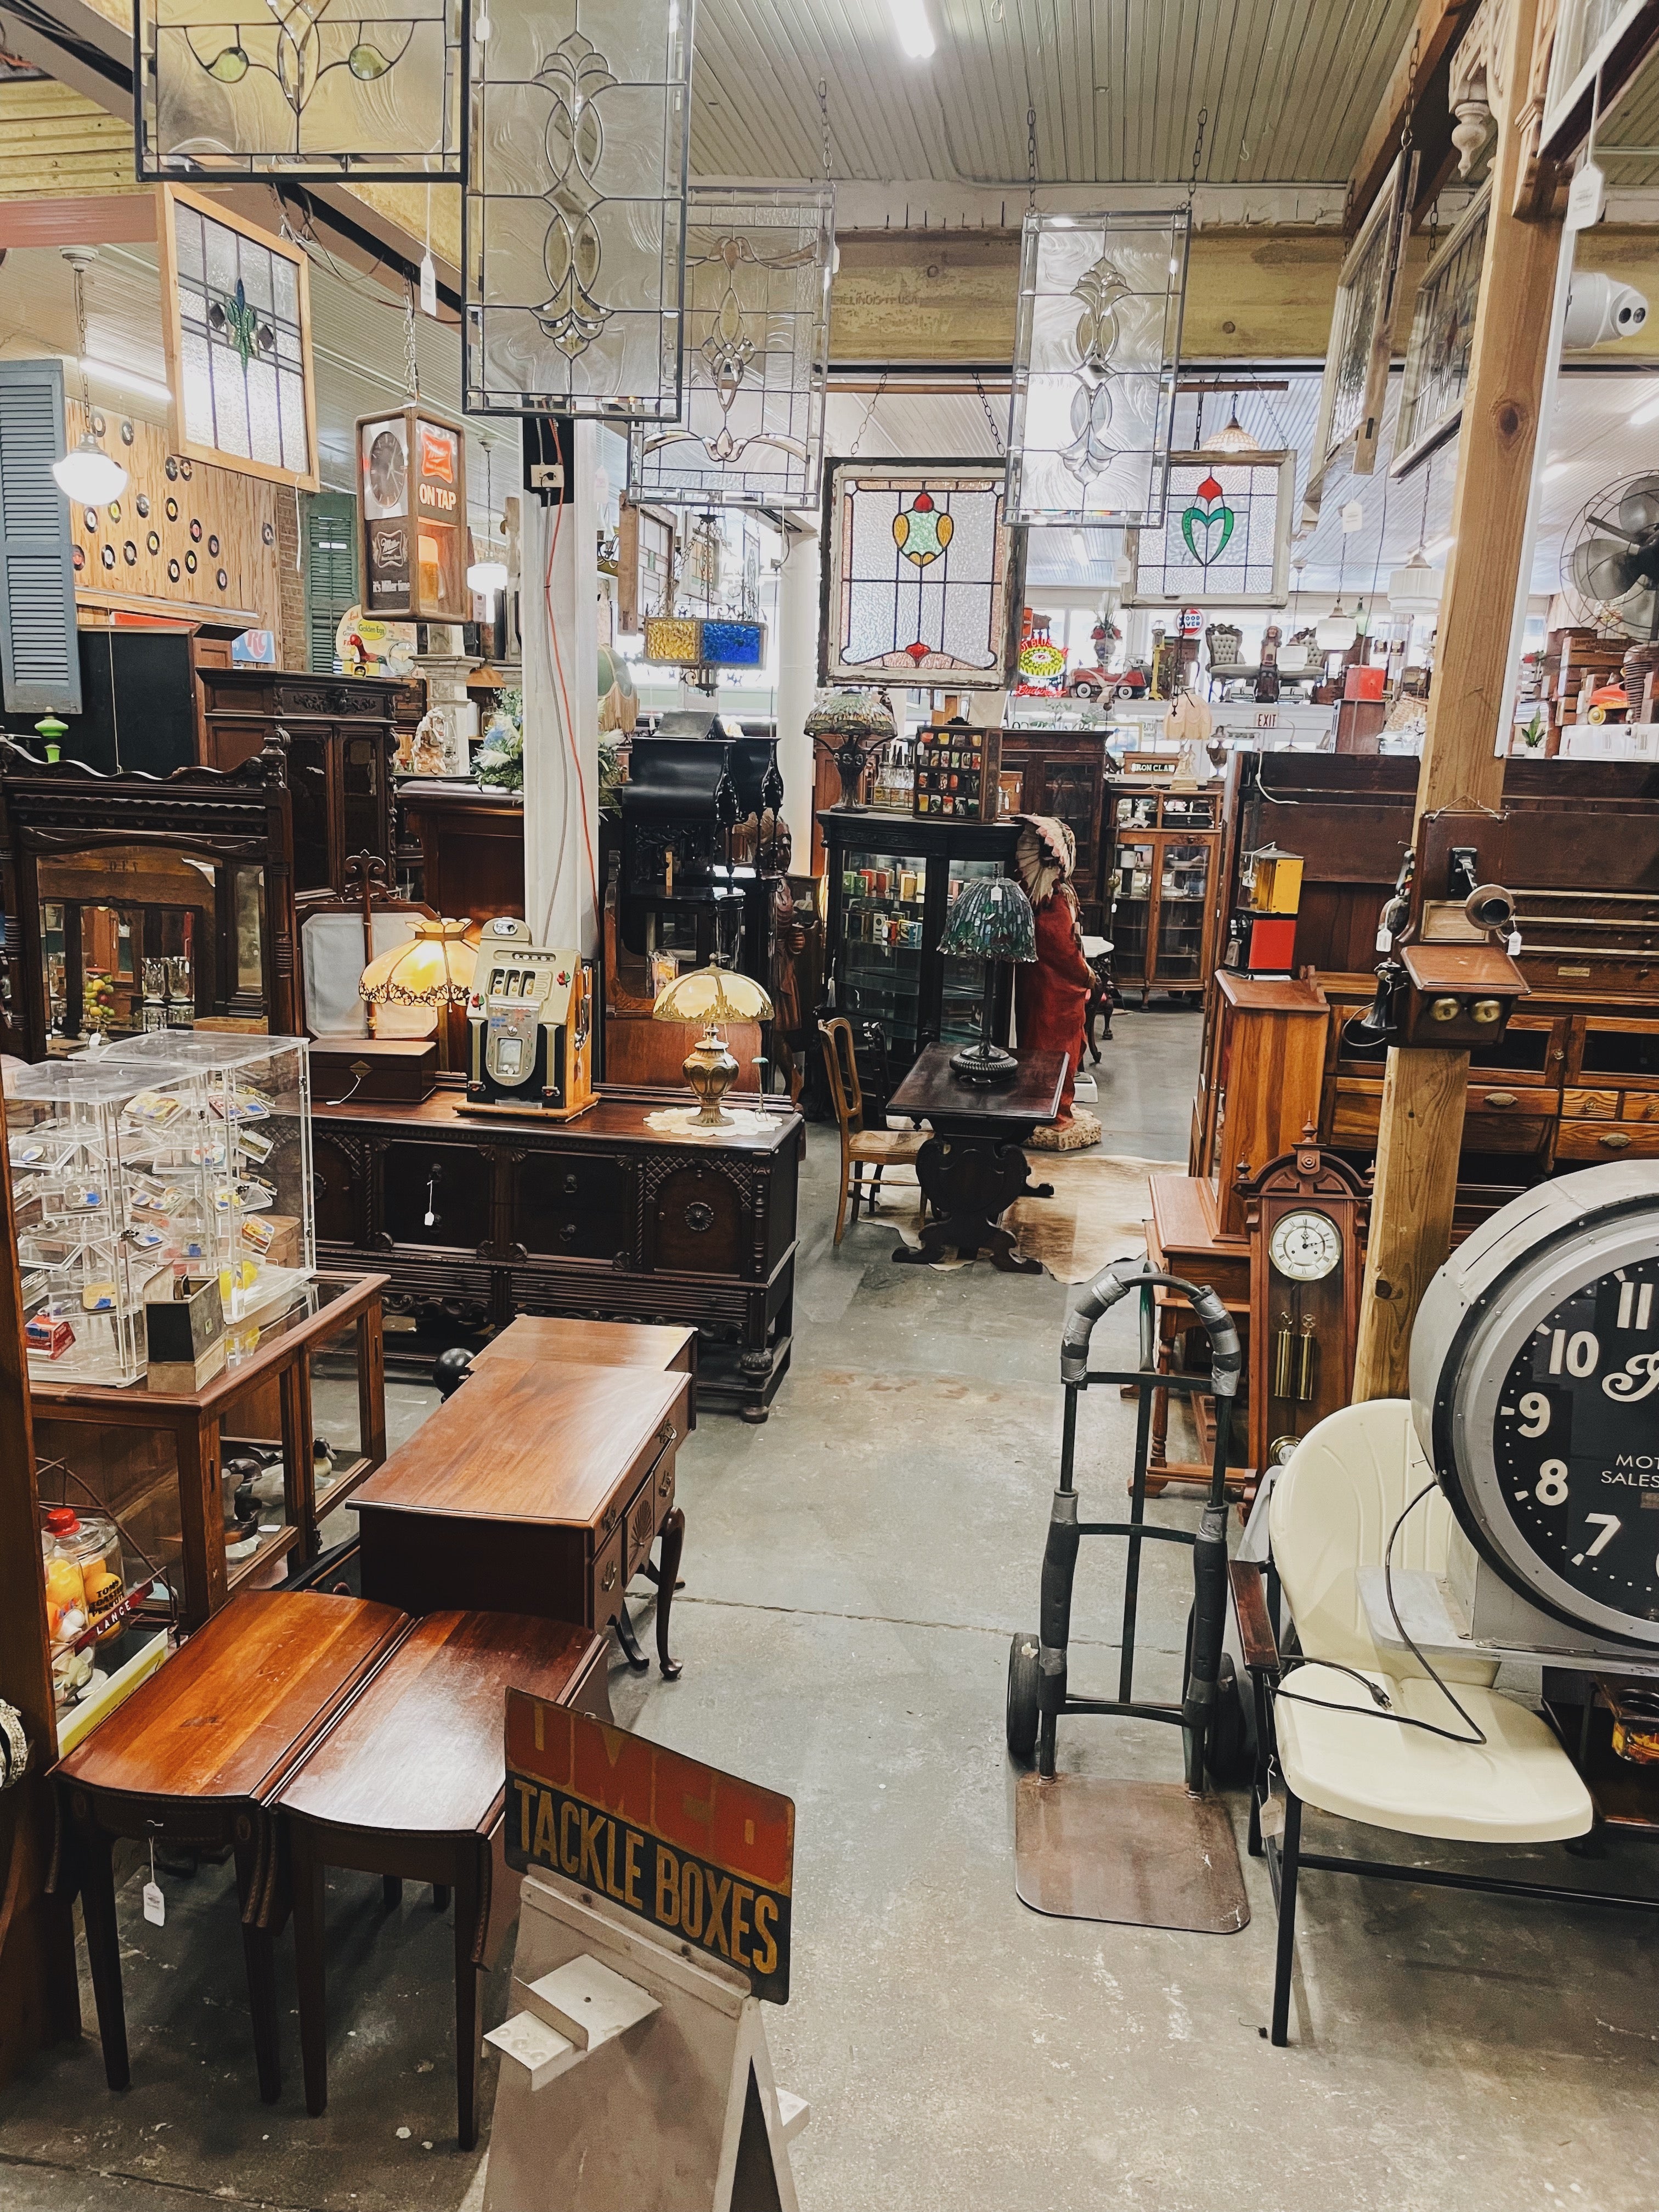 Interior of Roussel's Fine Jewelry and Antiques of Ponchatoula, Louisiana